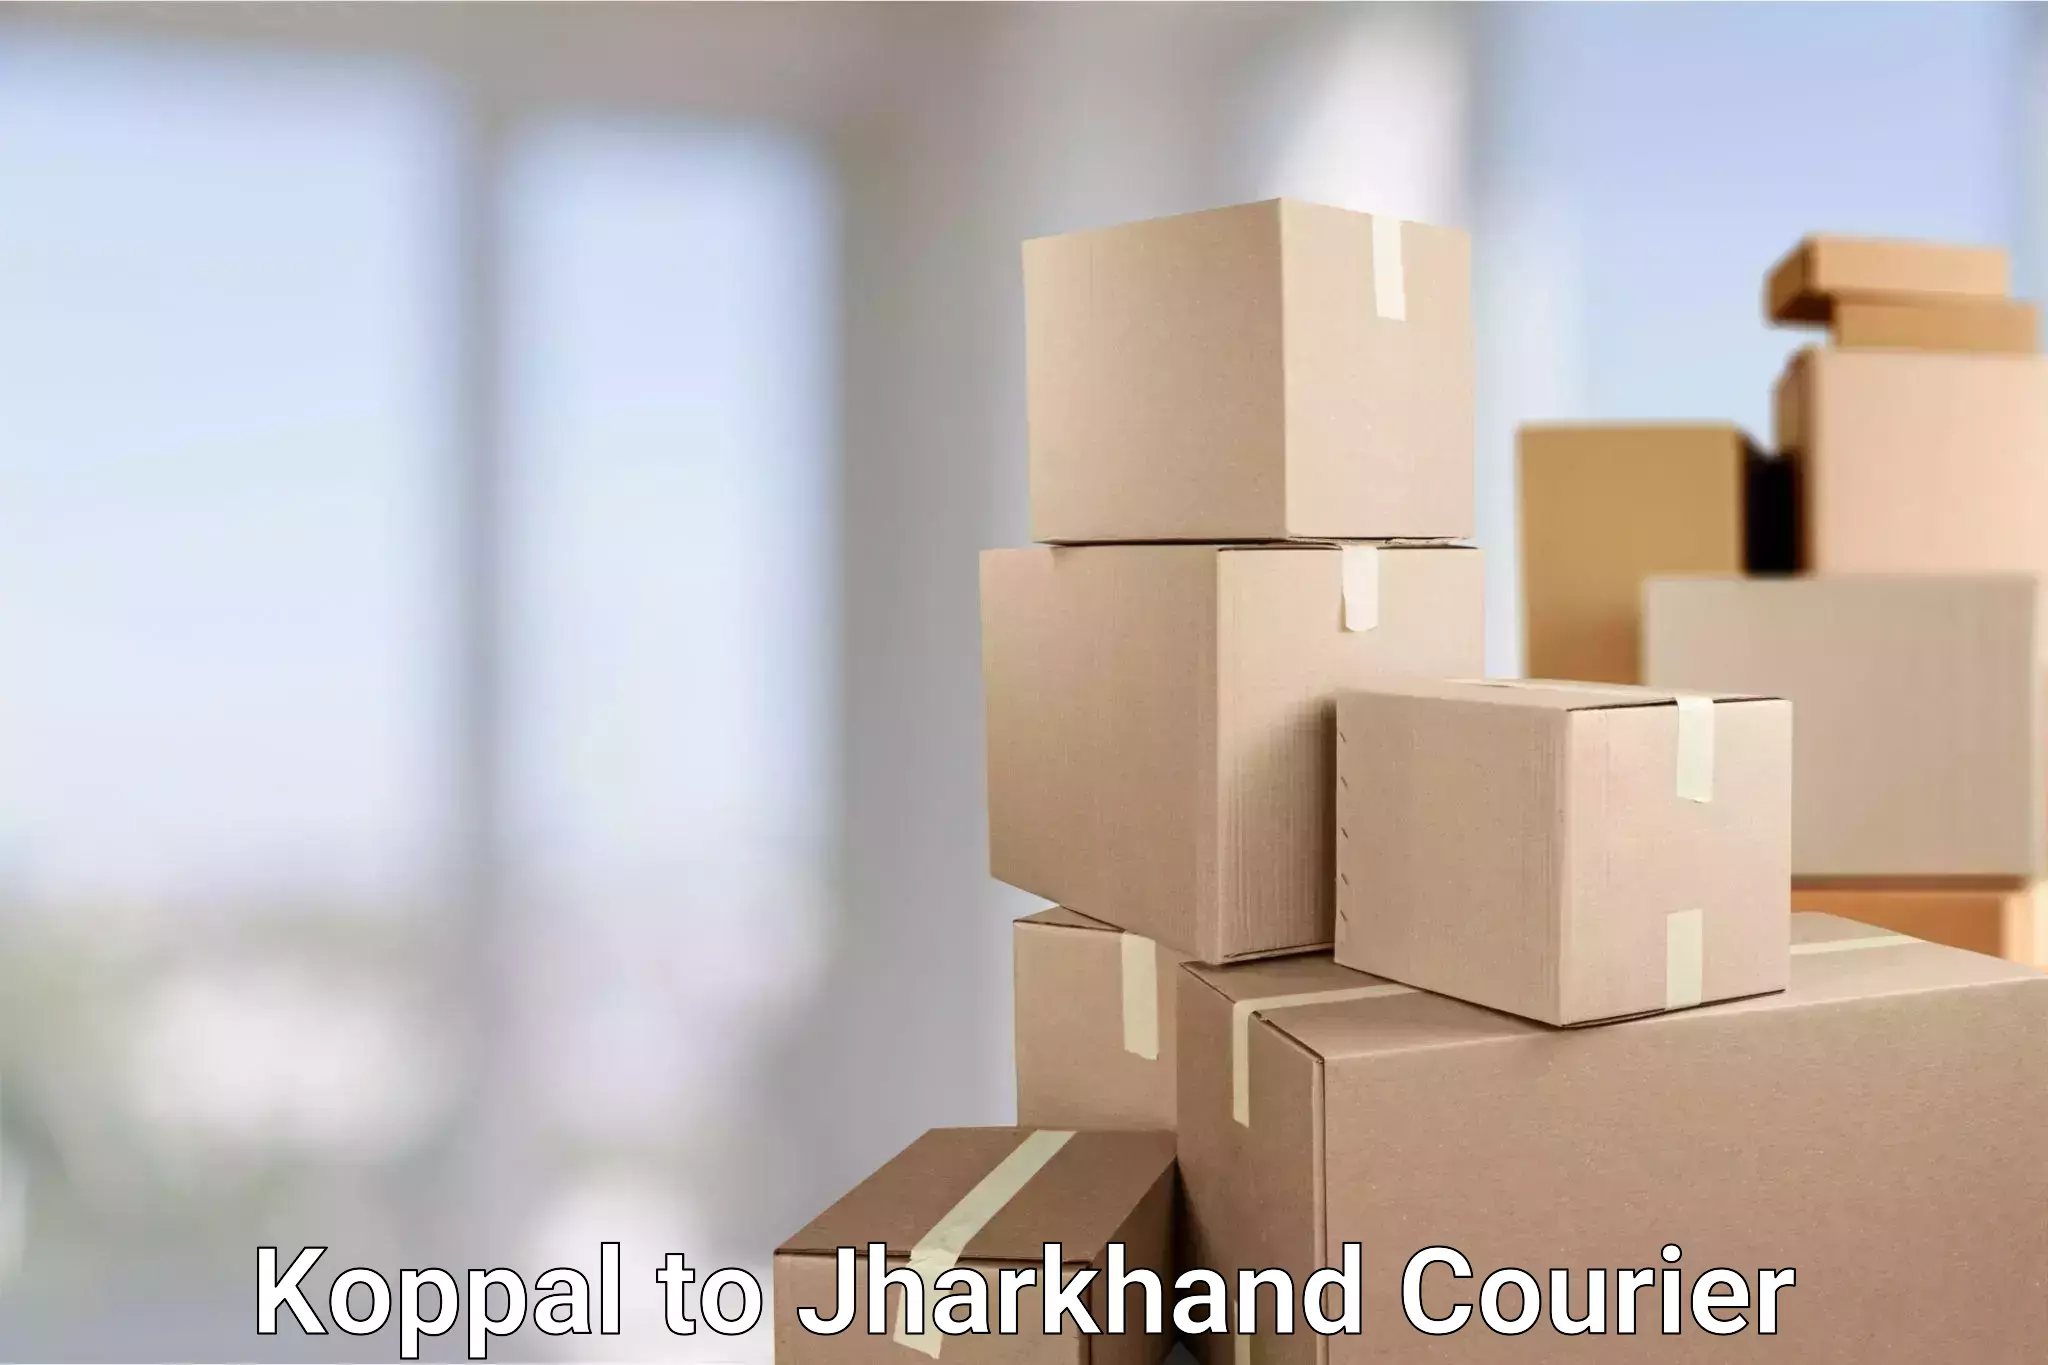 Local courier options Koppal to Dhanbad